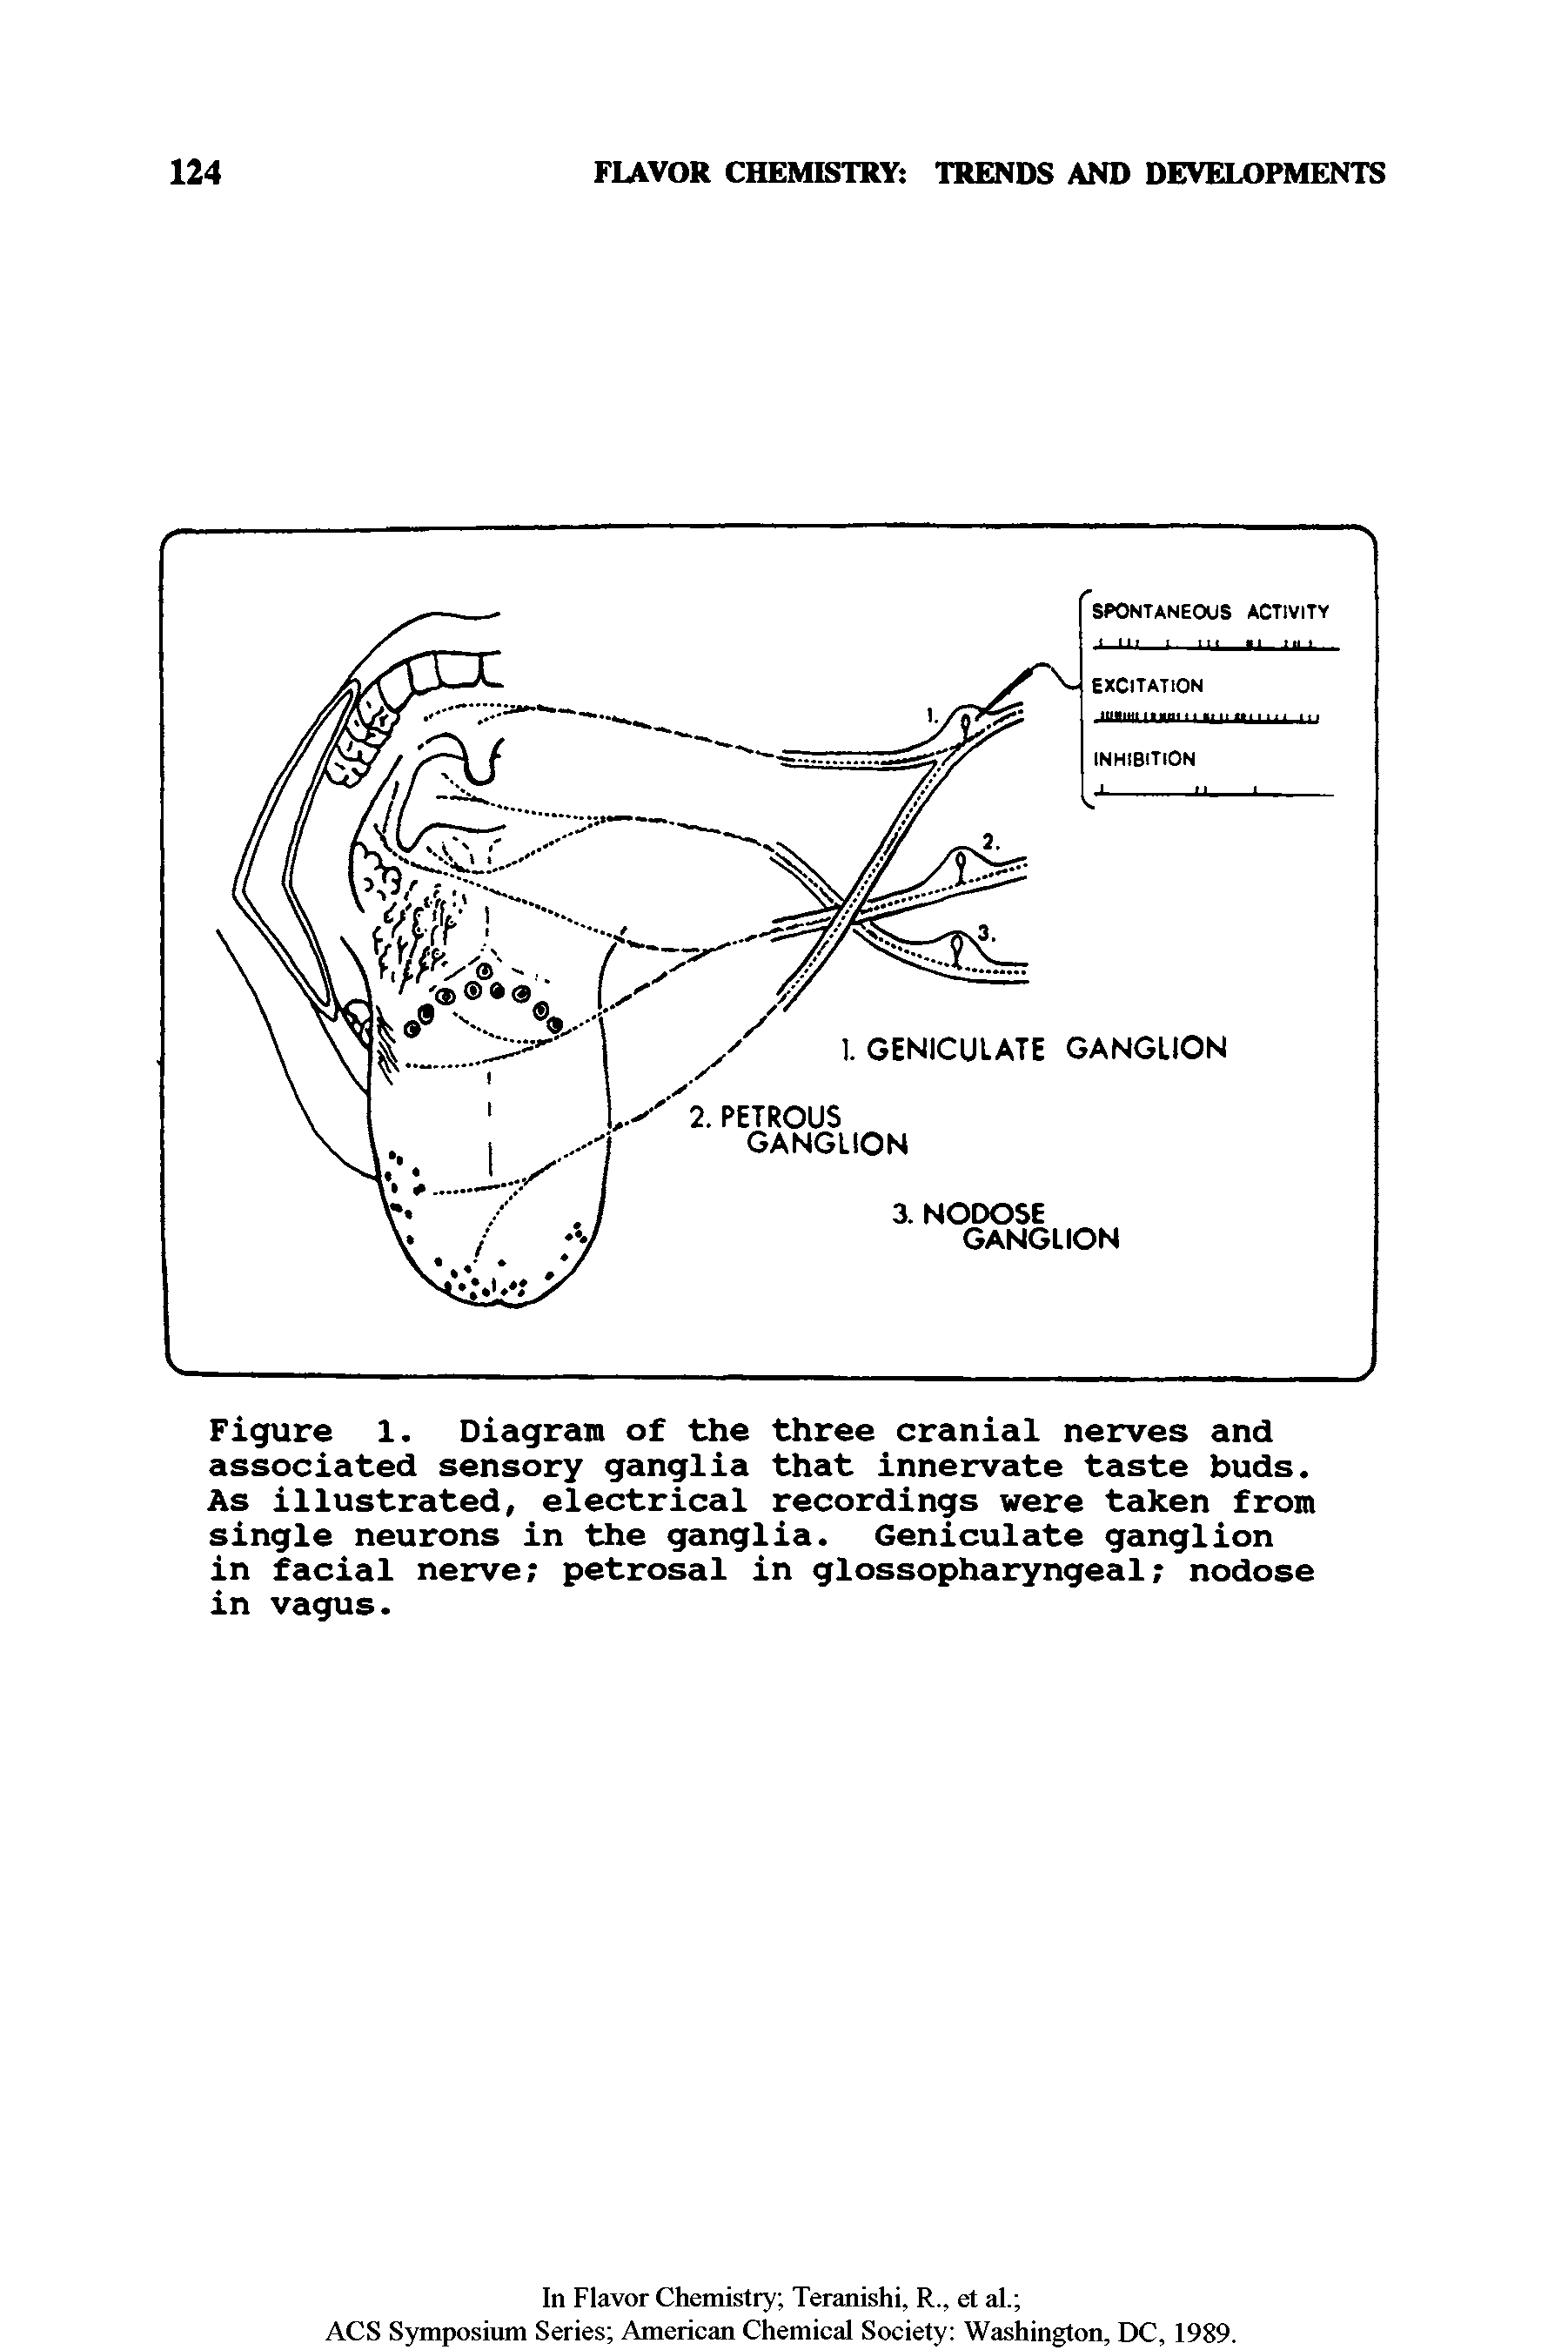 Figure 1. Diagram of the three cranial nerves and associated sensory ganglia that innervate taste buds. As illustrated, electrical recordings were taken from single neurons in the ganglia. Geniculate ganglion in facial nerve petrosal in glossopharyngeal nodose in vagus.